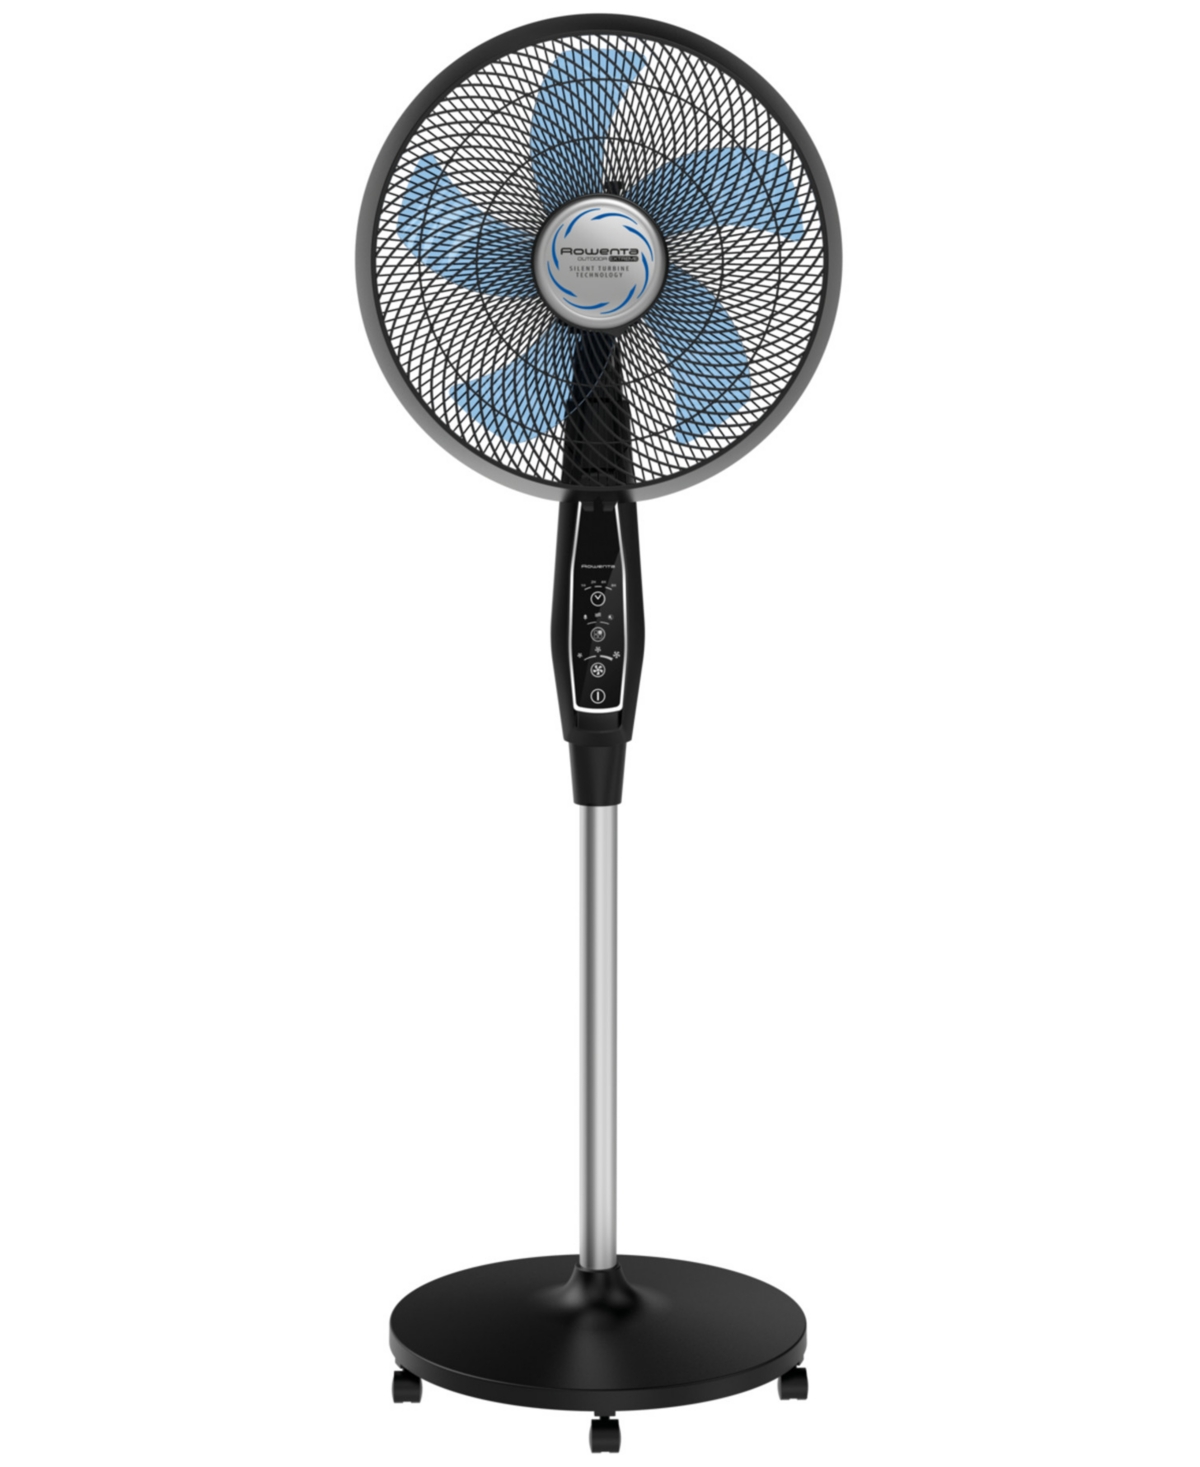 Outdoor Extreme Fan - Black